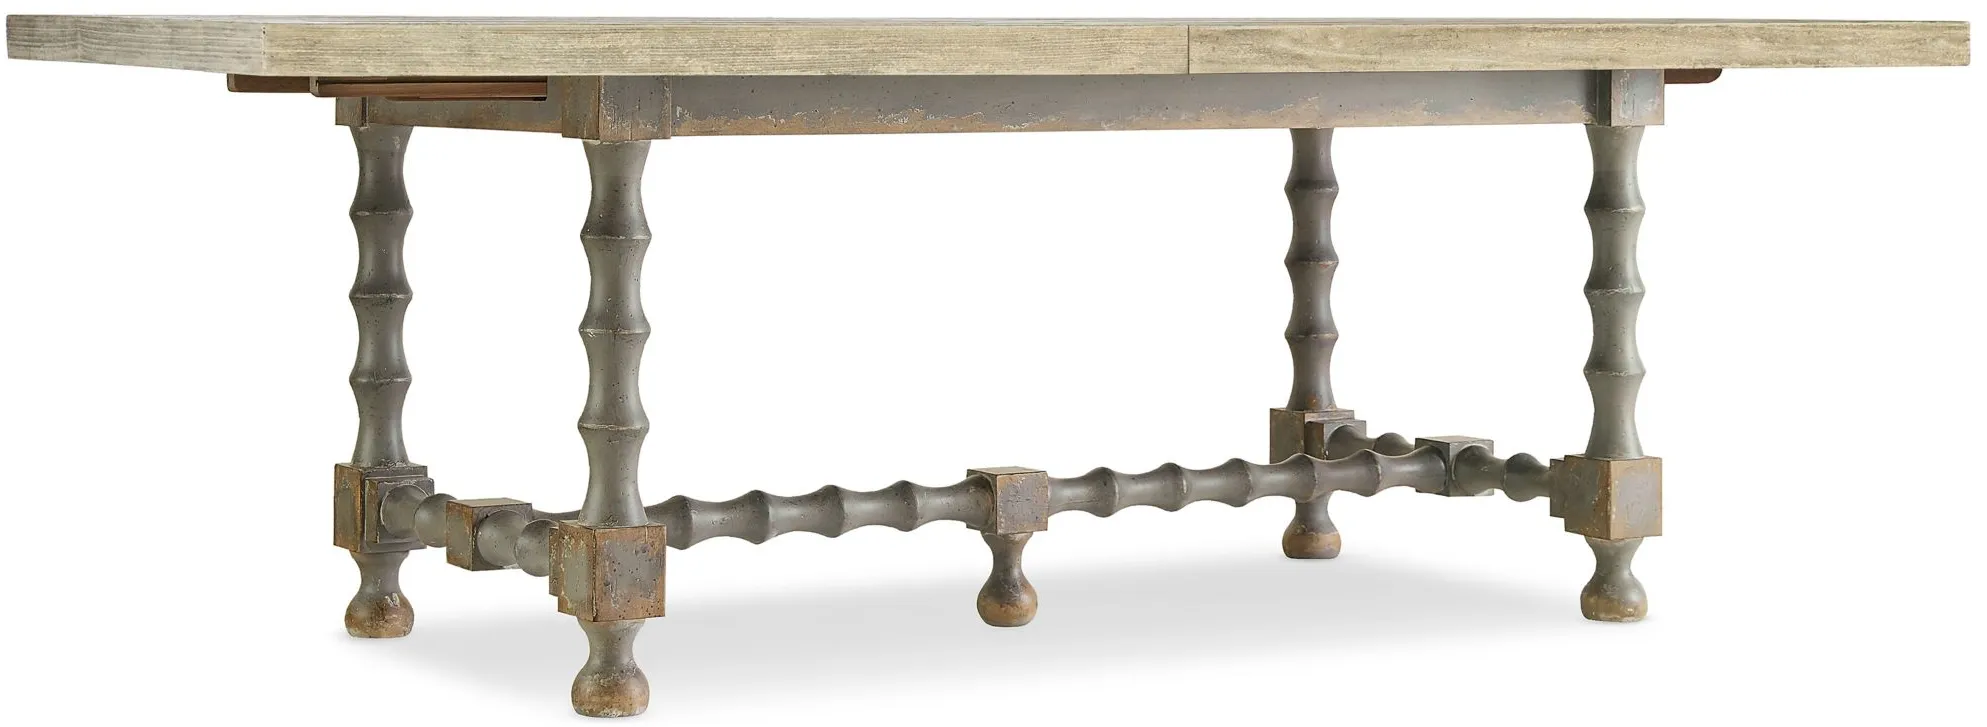 Ciao Bella 84in Rectangular Trestle Dining Table with Two Leaves in Time Worn Gray by Hooker Furniture